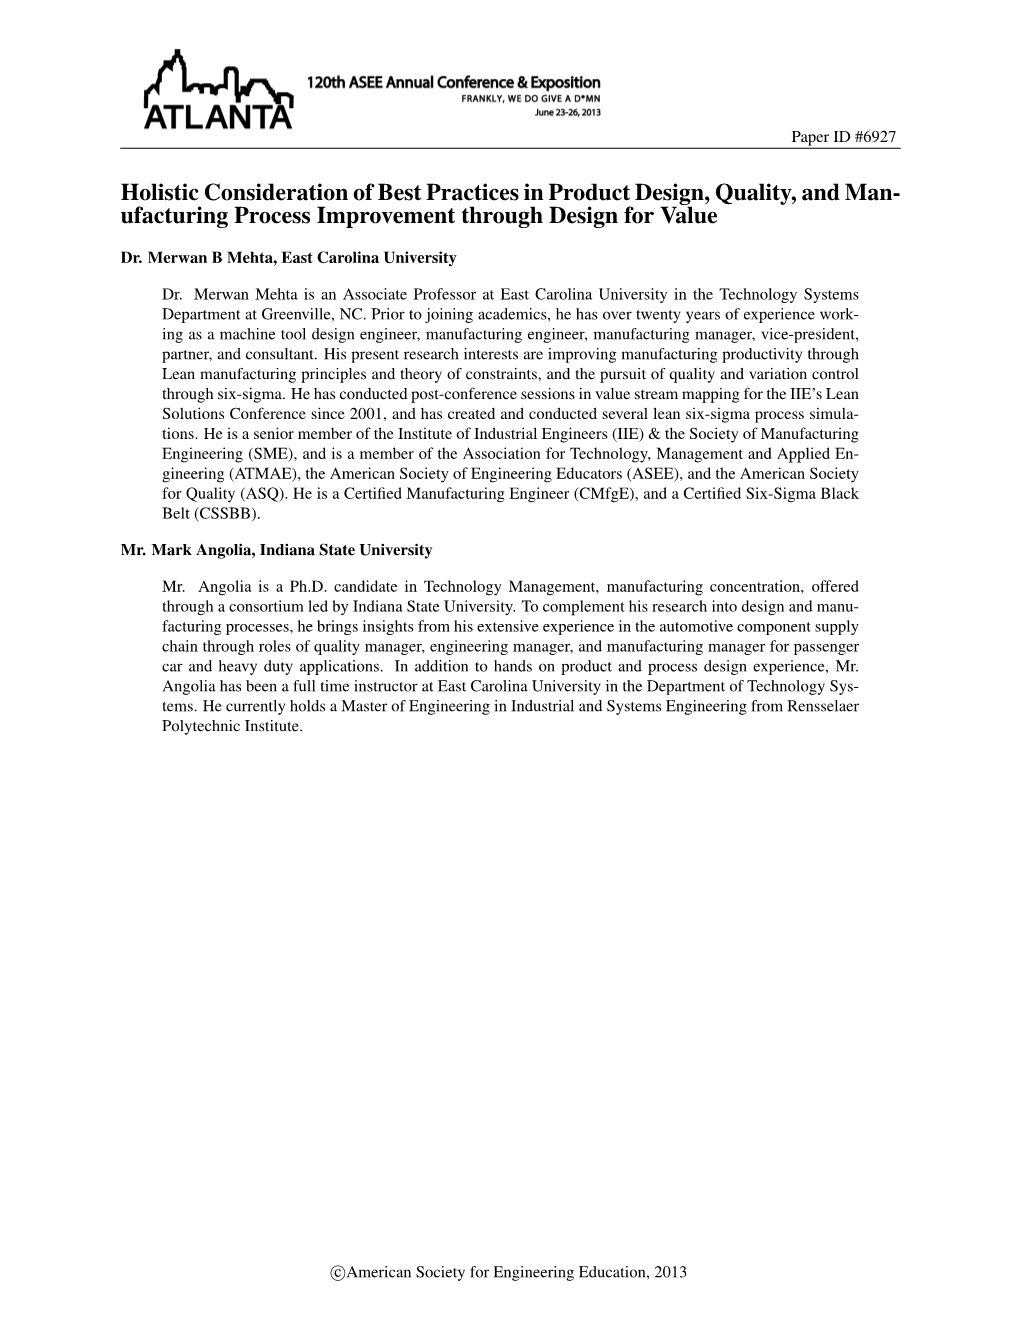 Holistic Consideration of Best Practices in Product Design, Quality, and Man- Ufacturing Process Improvement Through Design for Value